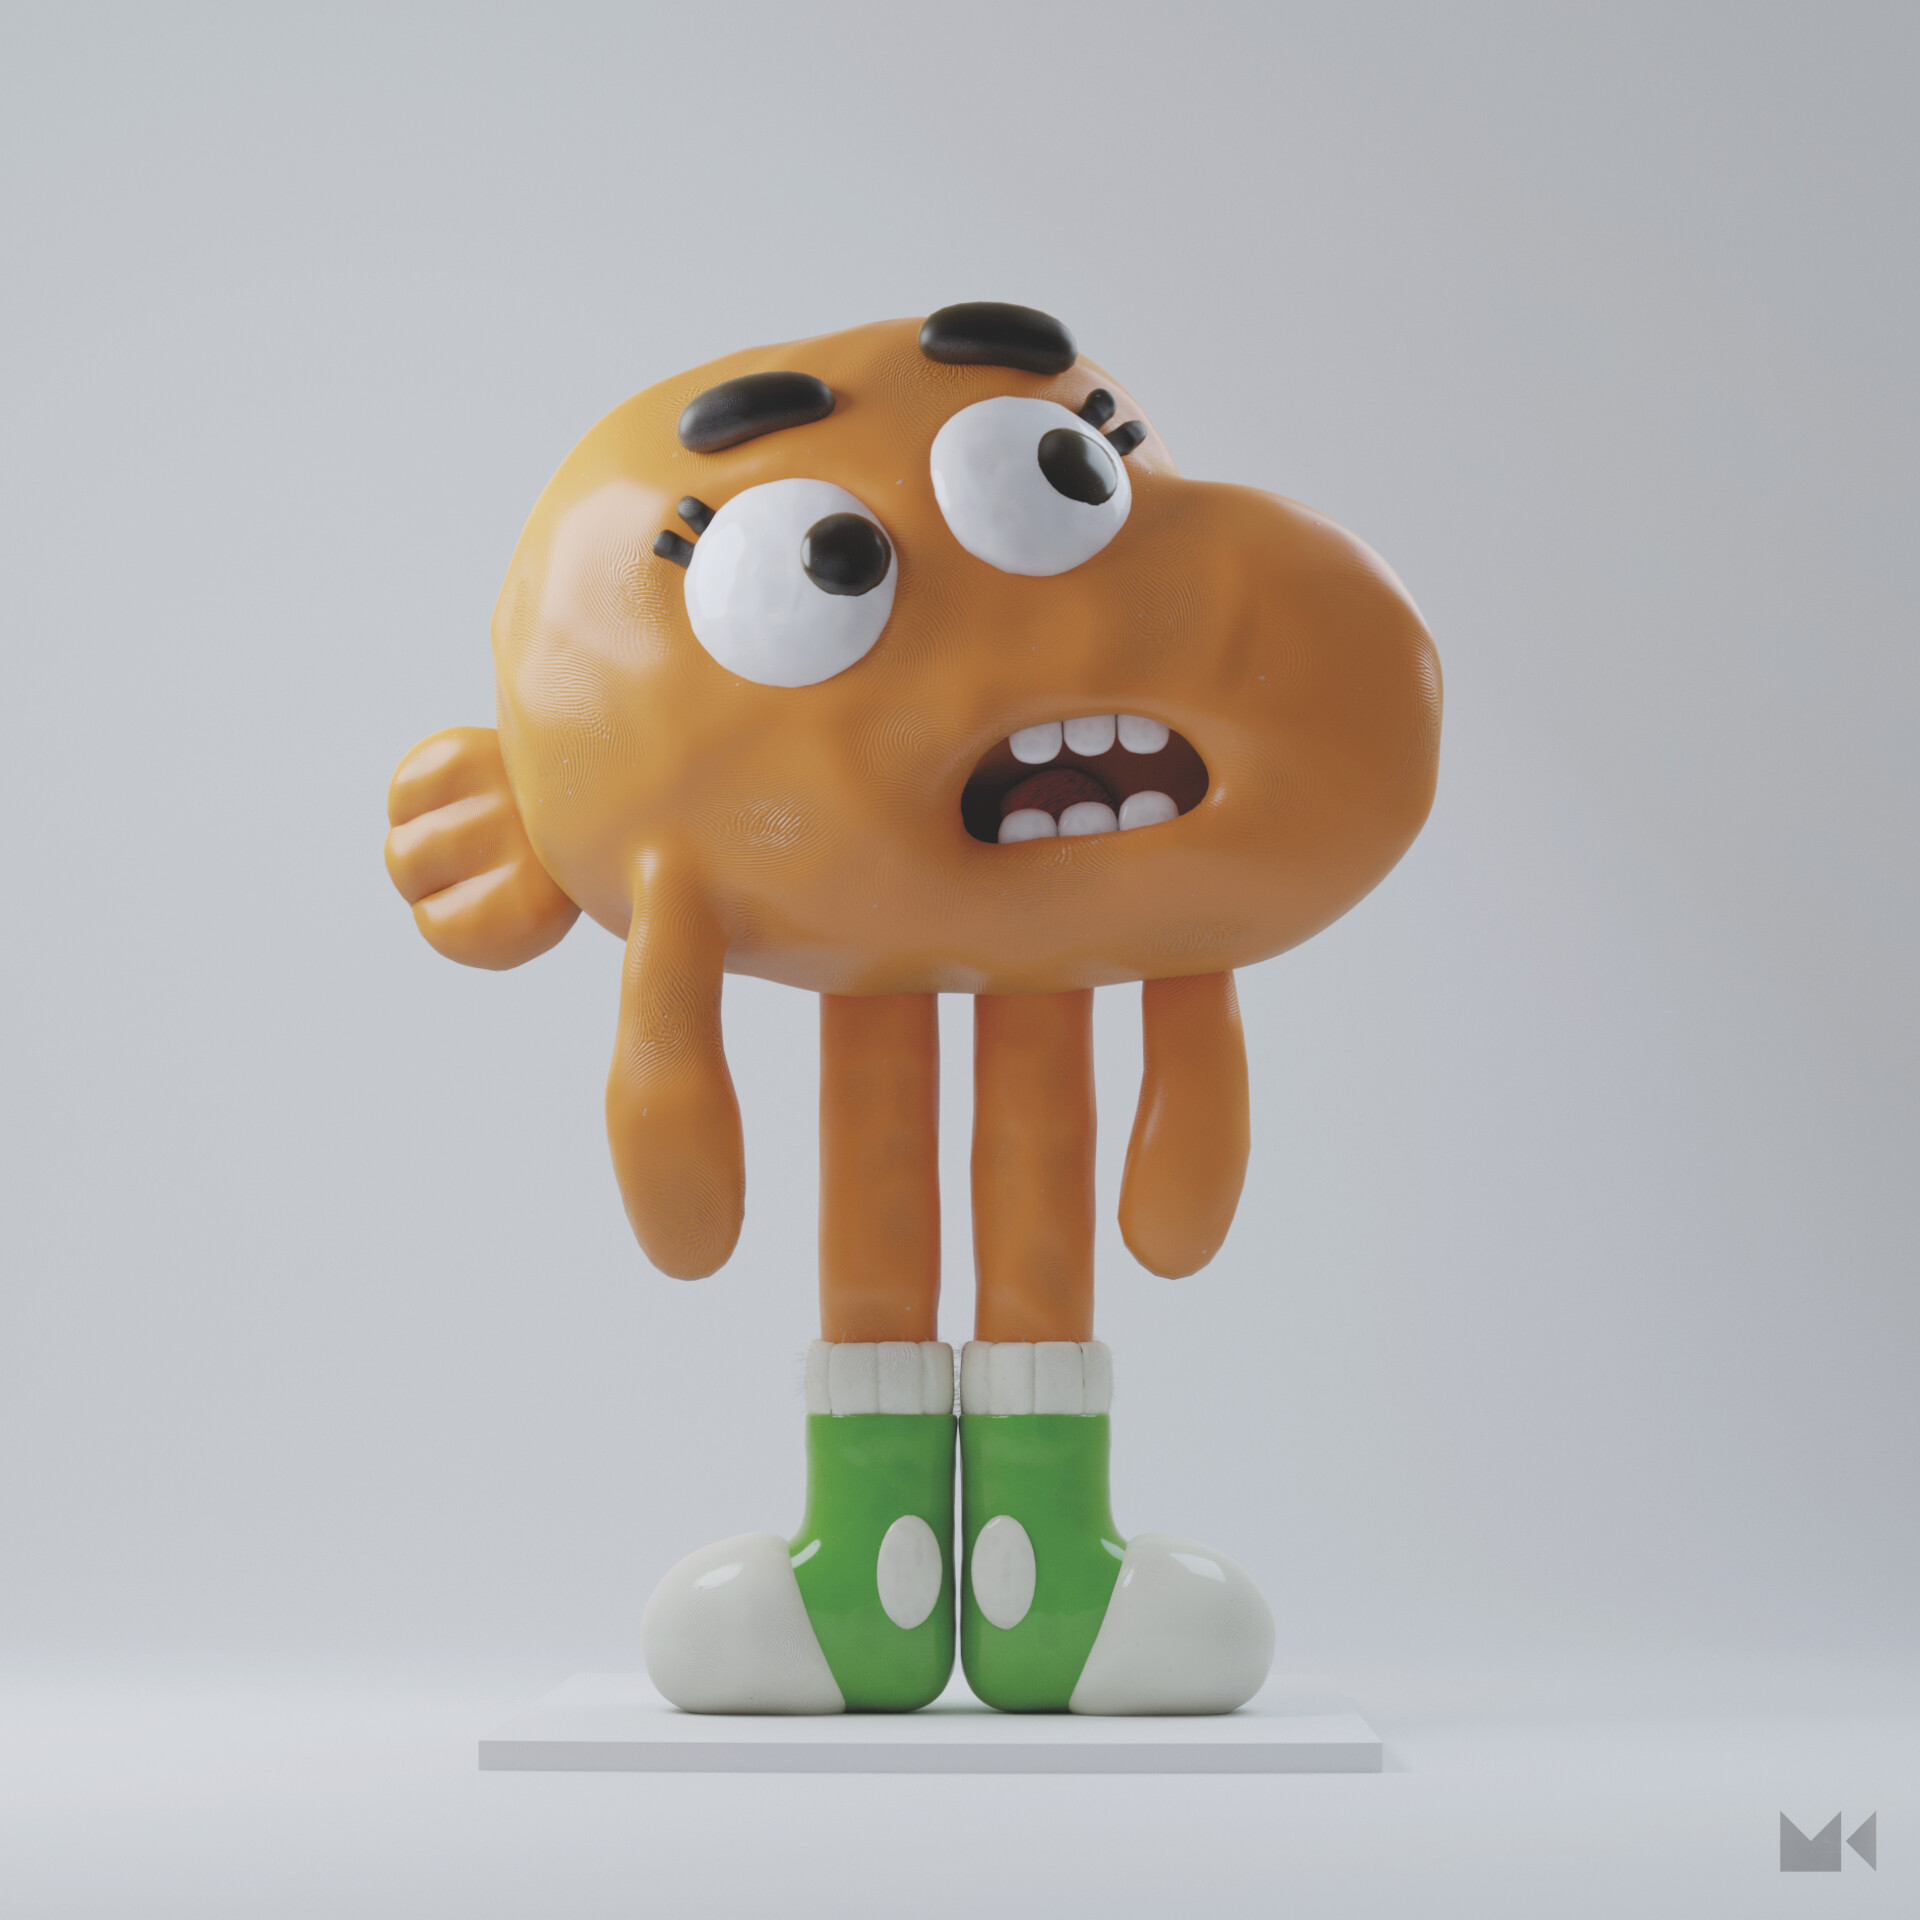 ArtStation - The Amazing World of Gumball in My Style